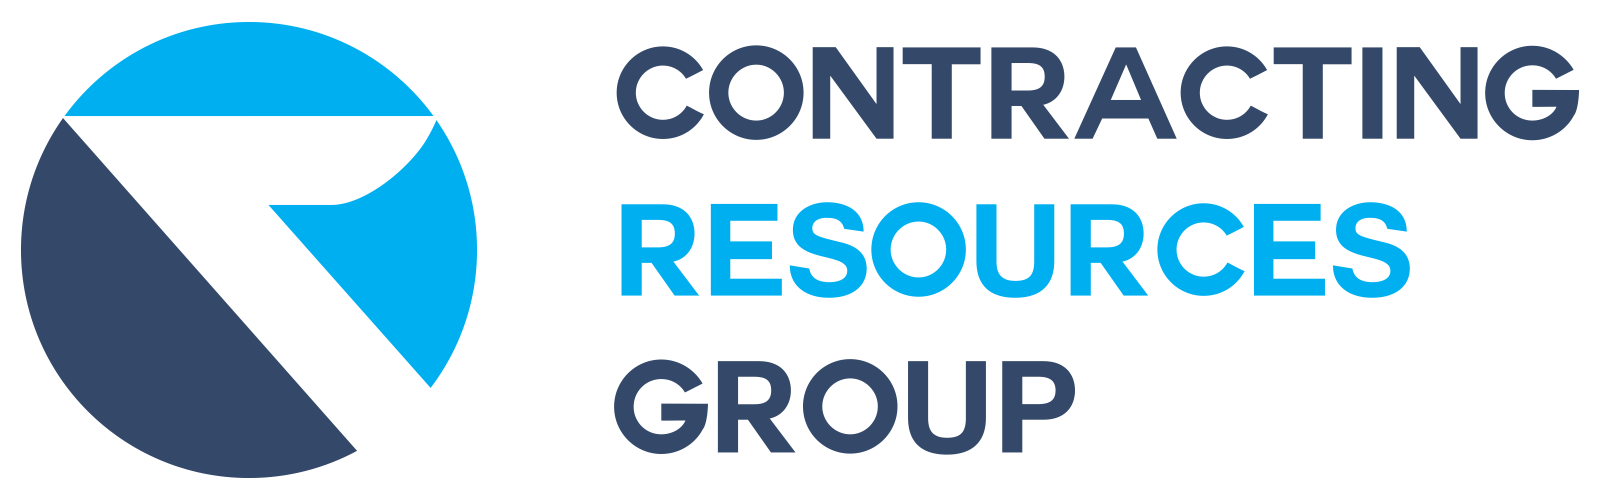 Contracting Resources Group, Inc. Company Logo